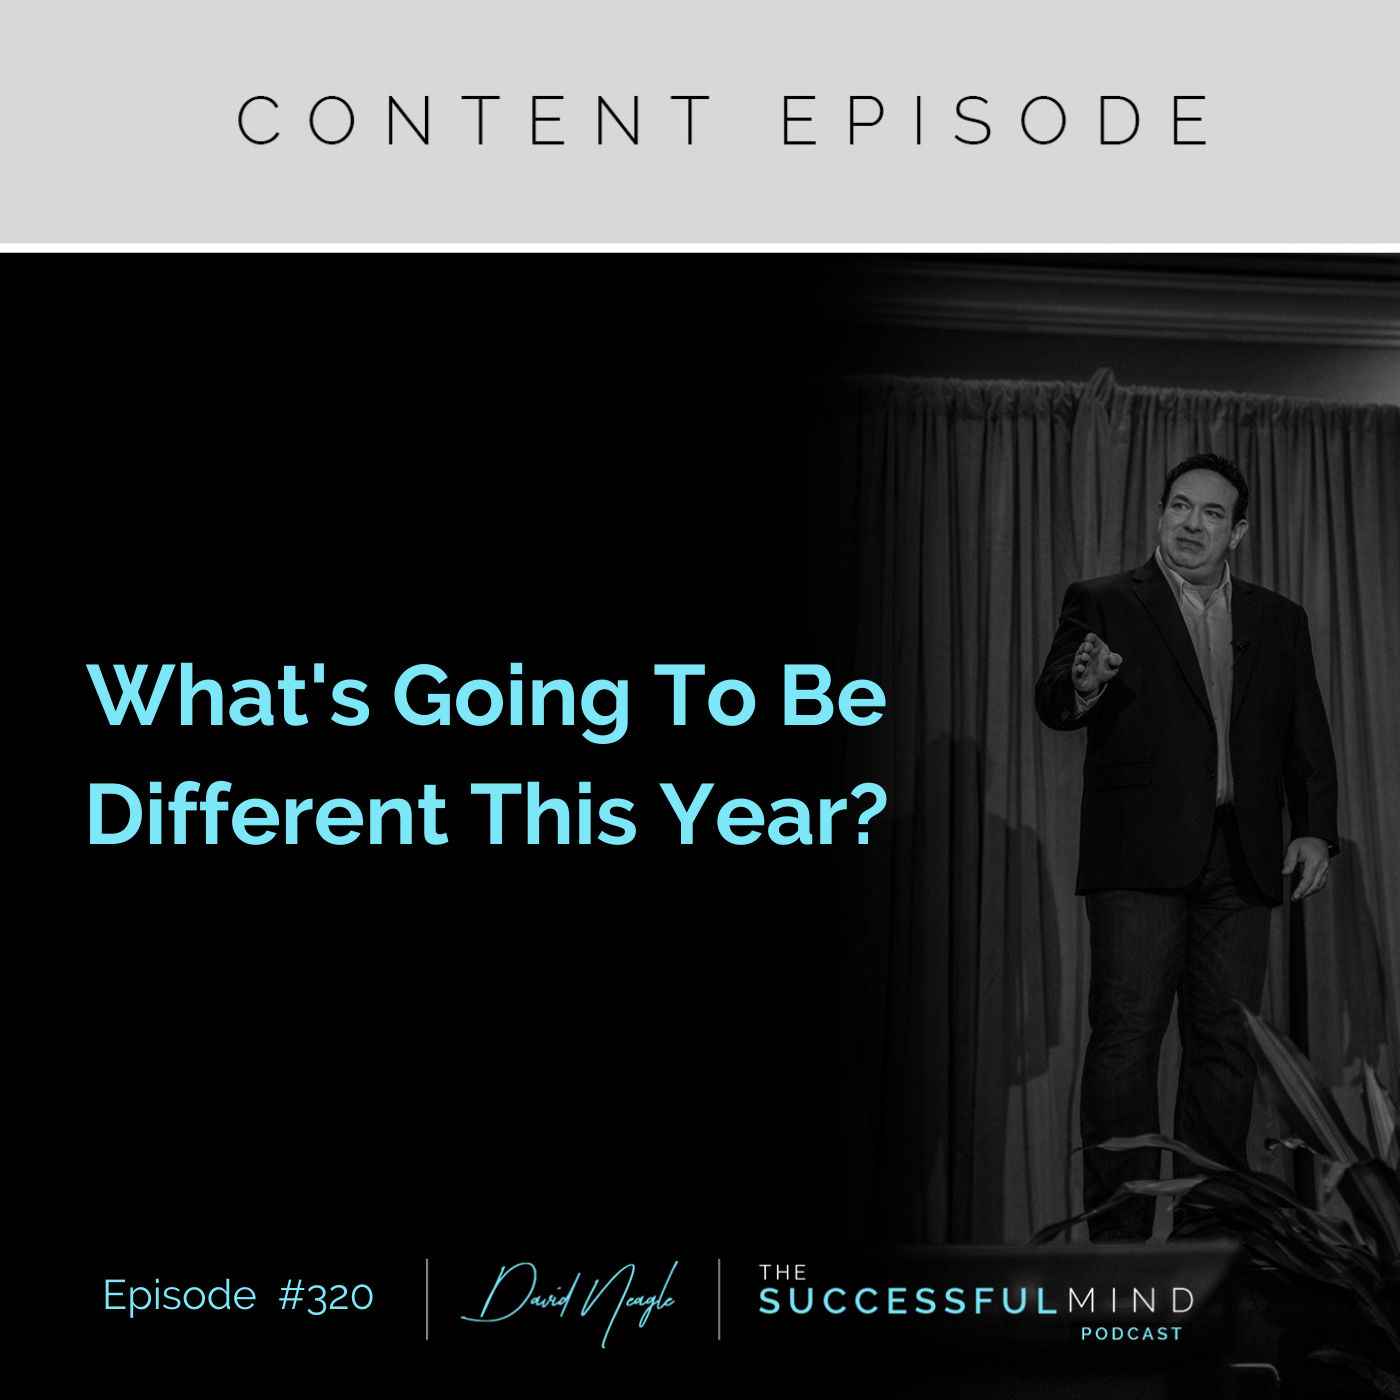 The Successful Mind Podcast - Whats Going To Be Different This Year?